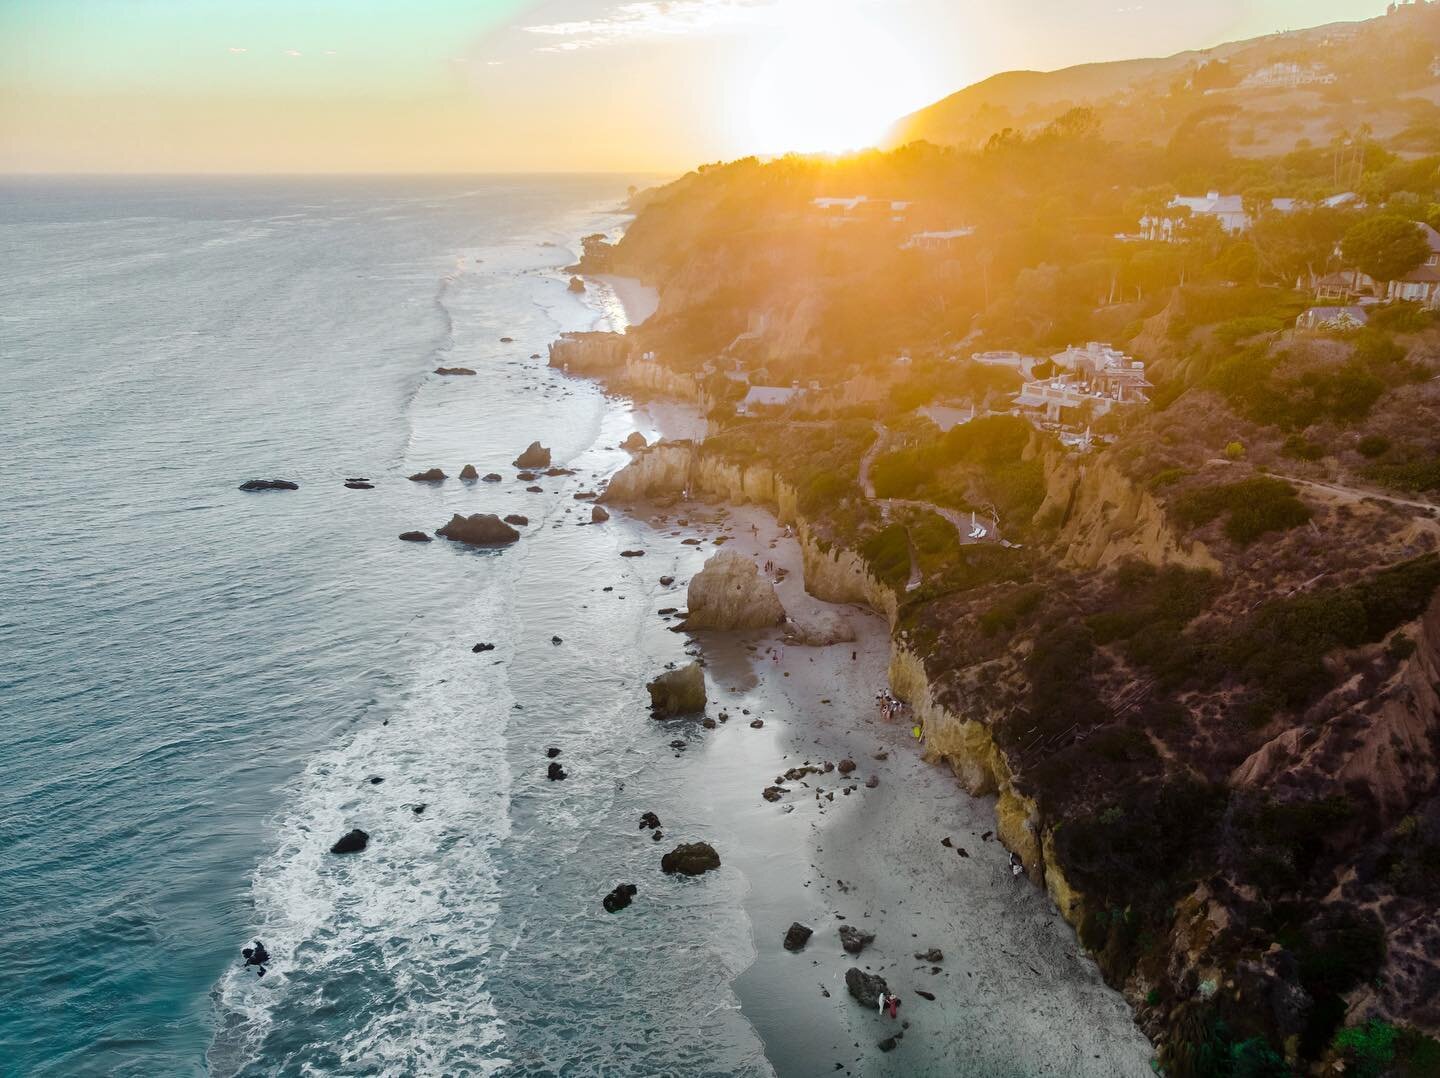 How are you staying cool this Labor Day? Prospector Ranch is a half hour drive from some of our favorite Southern California beaches, so you know where we&rsquo;ll be today.
.
.
.
.
.
#beach #malibu #leocarrillo #statebeach #beaches #socal #socalbeac